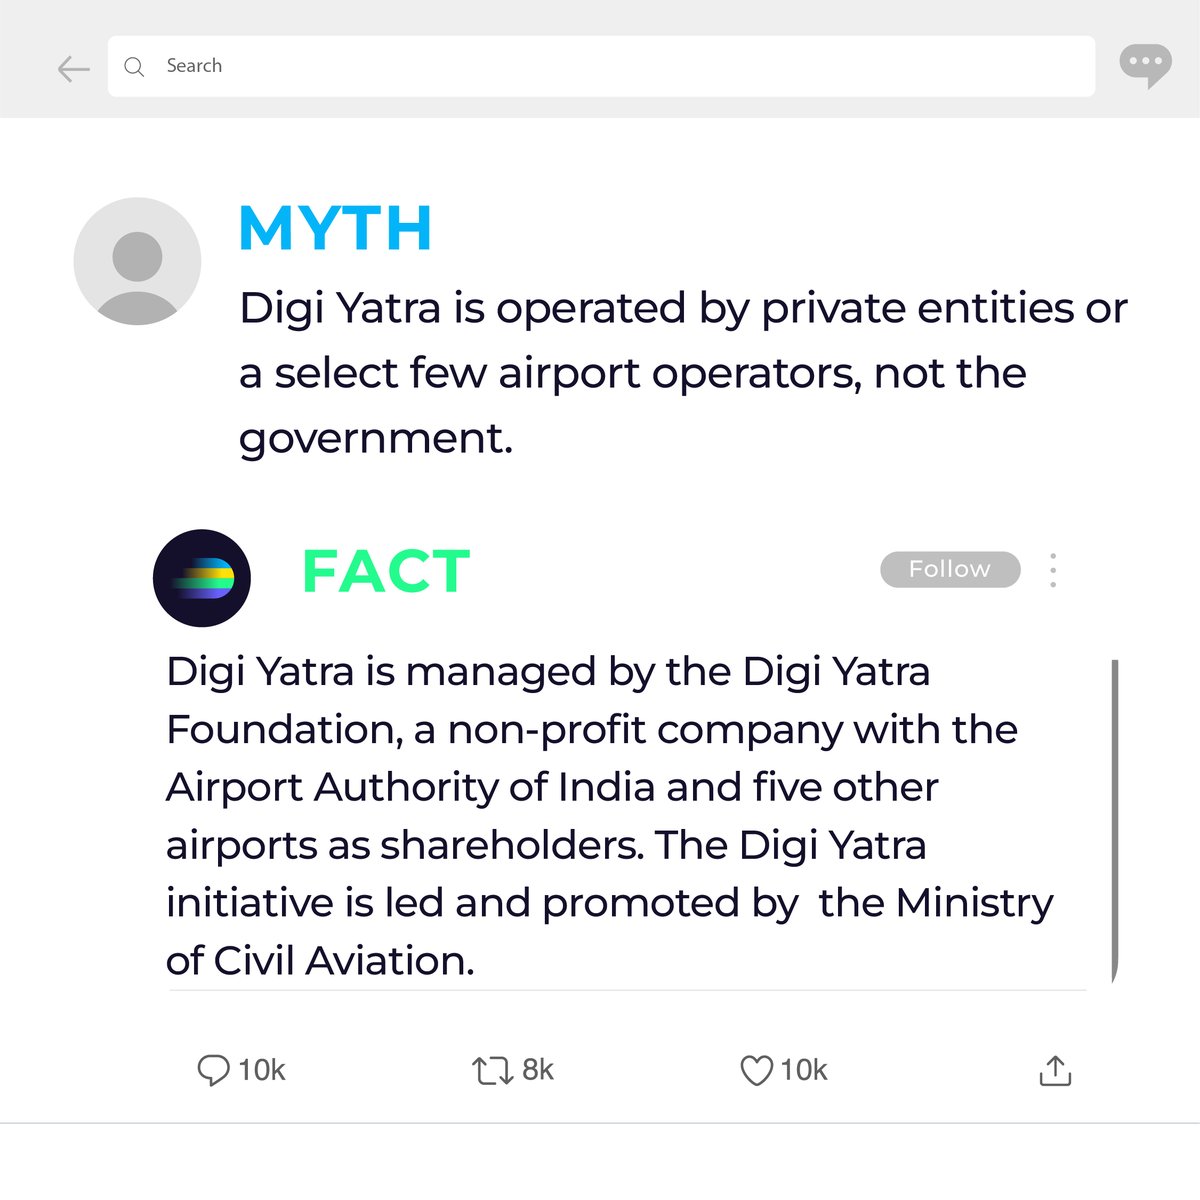 Separating myths from facts! 💡

Digi Yatra is managed by the non-profit company - Digi Yatra Foundation and is promoted by the Ministry of Civil Aviation.

Stay informed, stay secure!

Download the Digi Yatra App now!
Available on IOS and Android.
#DigiYatra #MythsVsFacts…